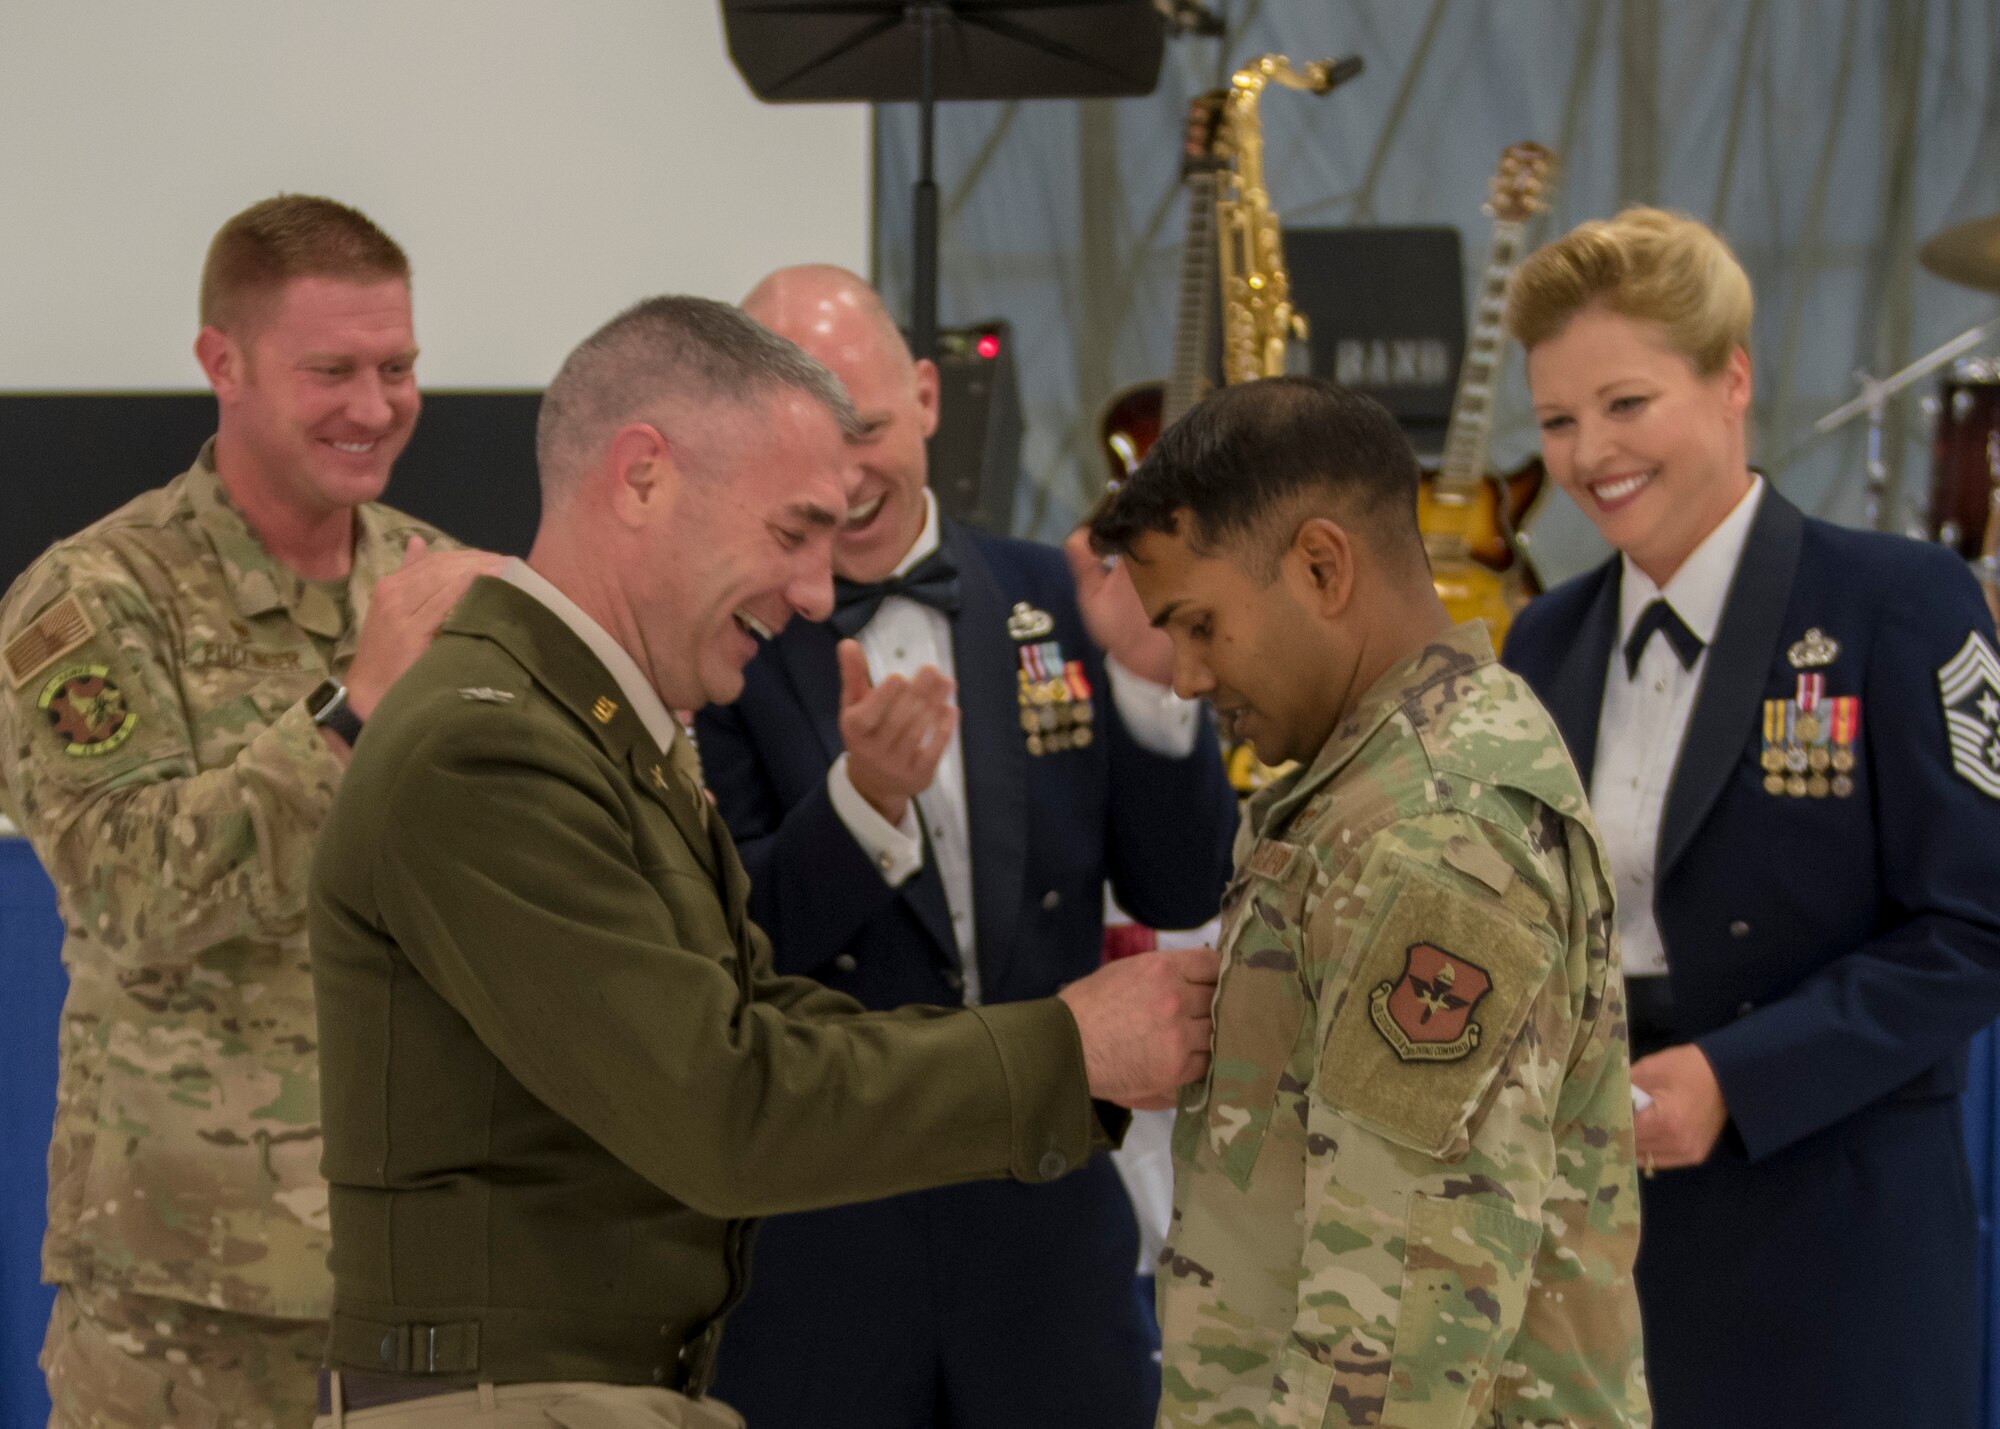 Col. Joseph Campo, 49th Wing commander, pins on rank for newly promoted Tech Sgt. Denzel Ramdhanie, 49th Component Maintenance Squadron avionics back shop production non-commissioned officer in charge at the Air Force Ball, Sept. 14, 2019, on Holloman Air Force Base, N.M. Ramdhanie promoted from staff sergeant to technical sergeant through the Stripes for Exceptional Performers program. (U.S. Air Force photo by Airman 1st Class Kindra Stewart)